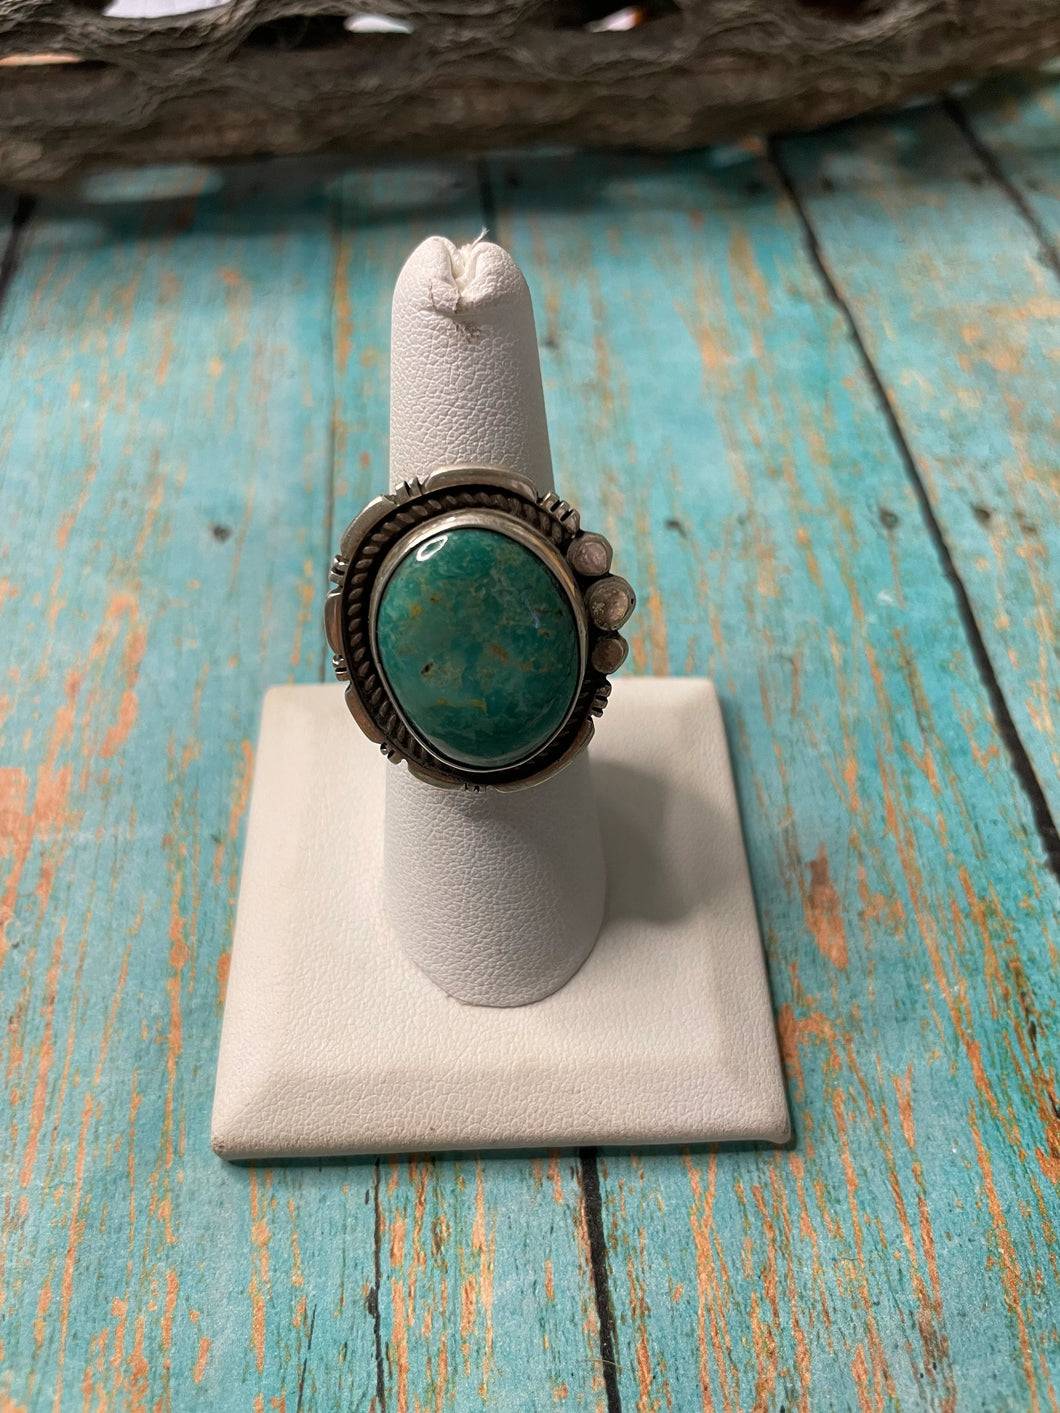 Old Pawn Navajo Sterling Silver & Turquoise Ring Size 6.5